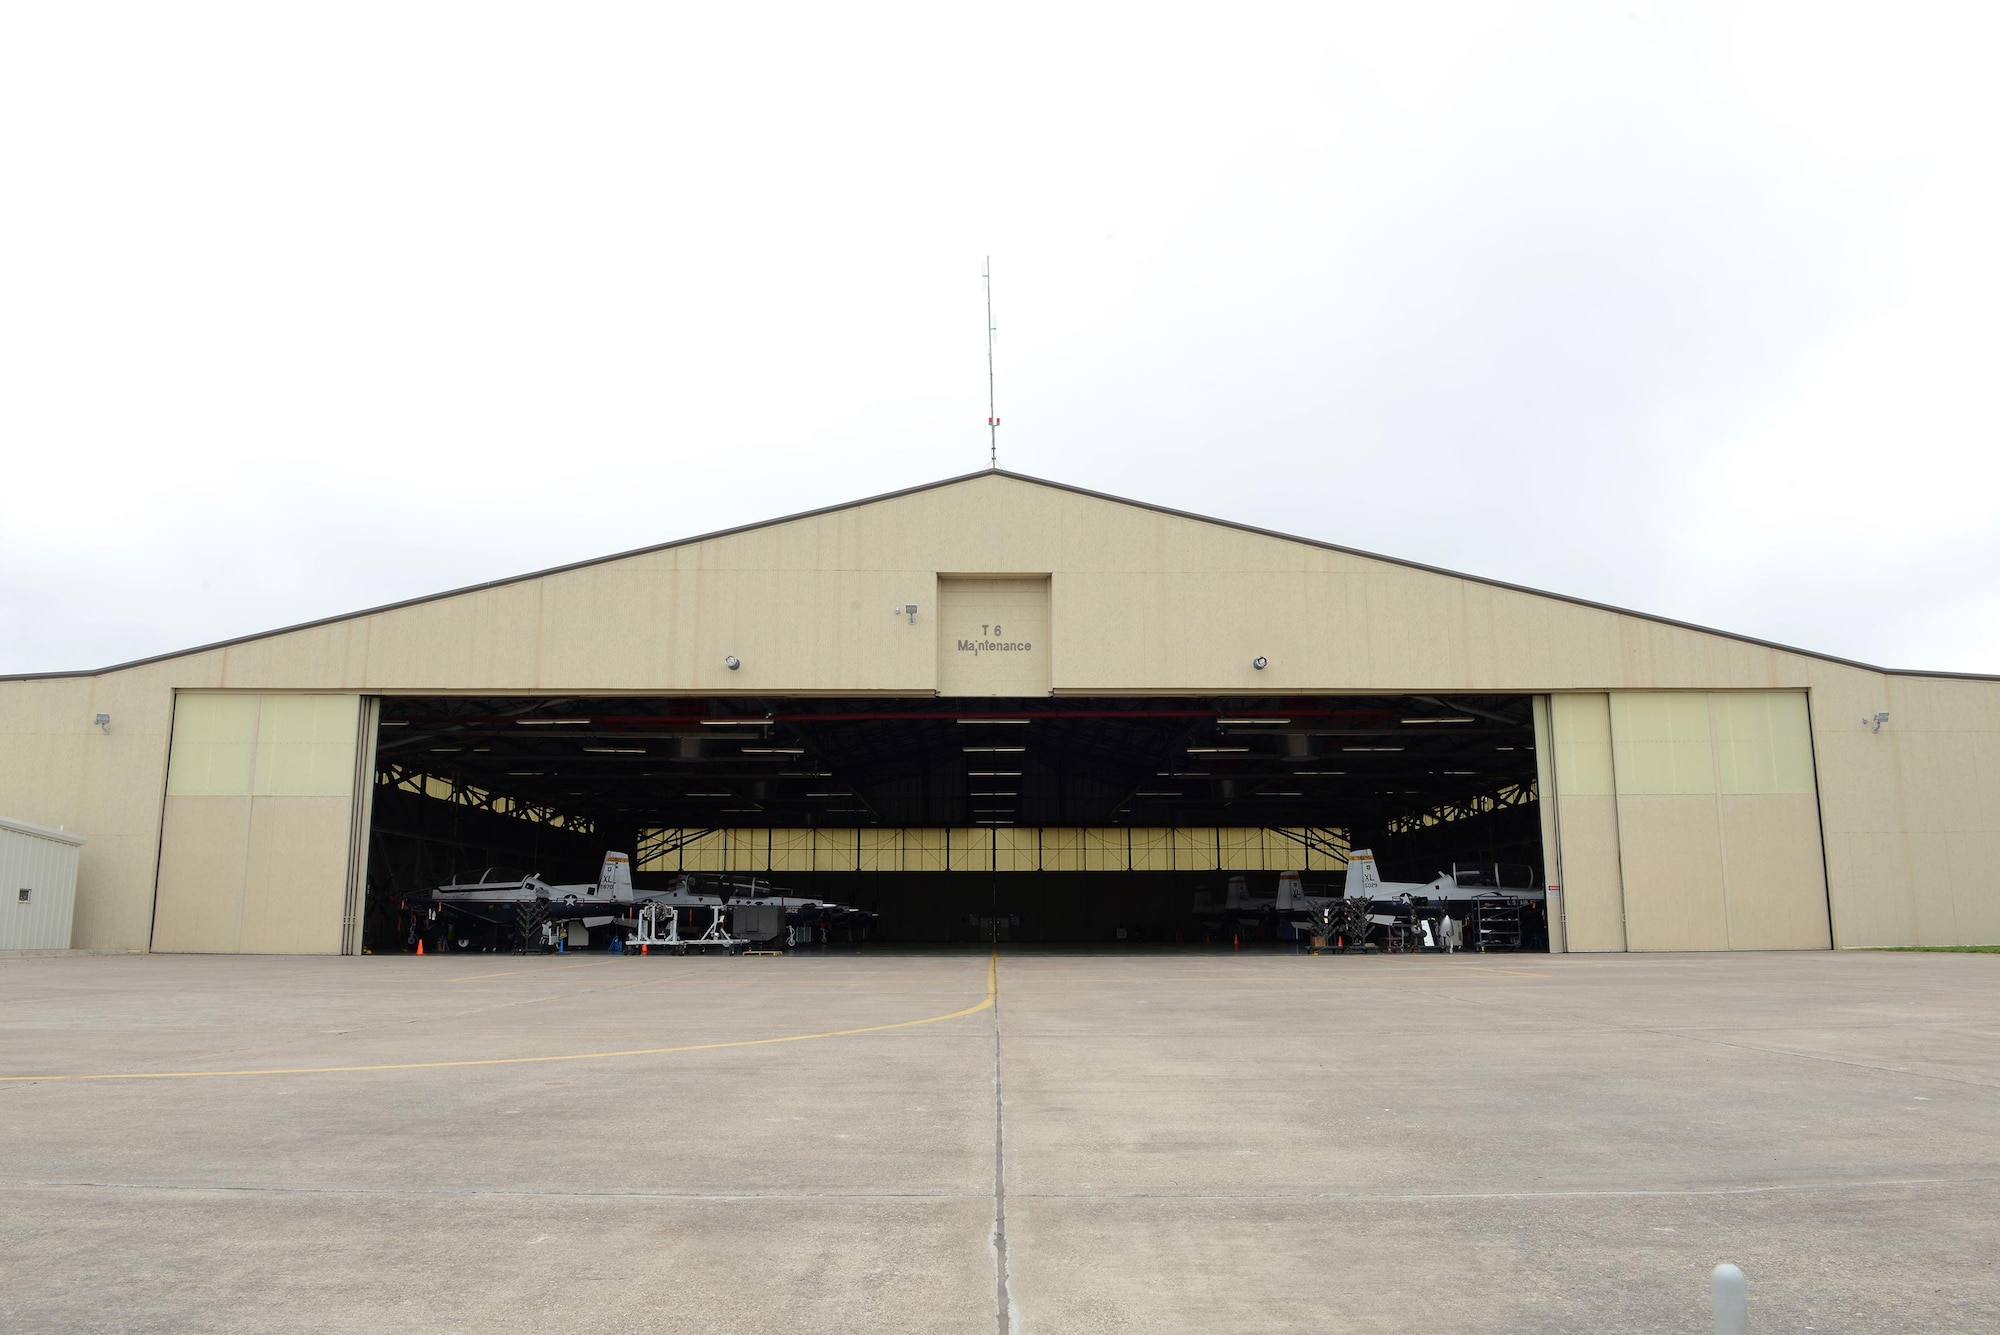 Laughlin’s T-6 maintenance hangar opens its doors on Laughlin Air Force Base, Texas, April 12, 2017. Laughlin’s T-6 maintainers have restored nearly all 38 of the T-6 hangar queens on base, putting Laughlin at the top of Air Education and Training Command with the least amount of T-6 hangar queens. A “hangar queen” is an aircraft that hasn’t been flown in more than 30 days. (U.S. Air Force photo/Airman 1st Class Benjamin N. Valmoja)